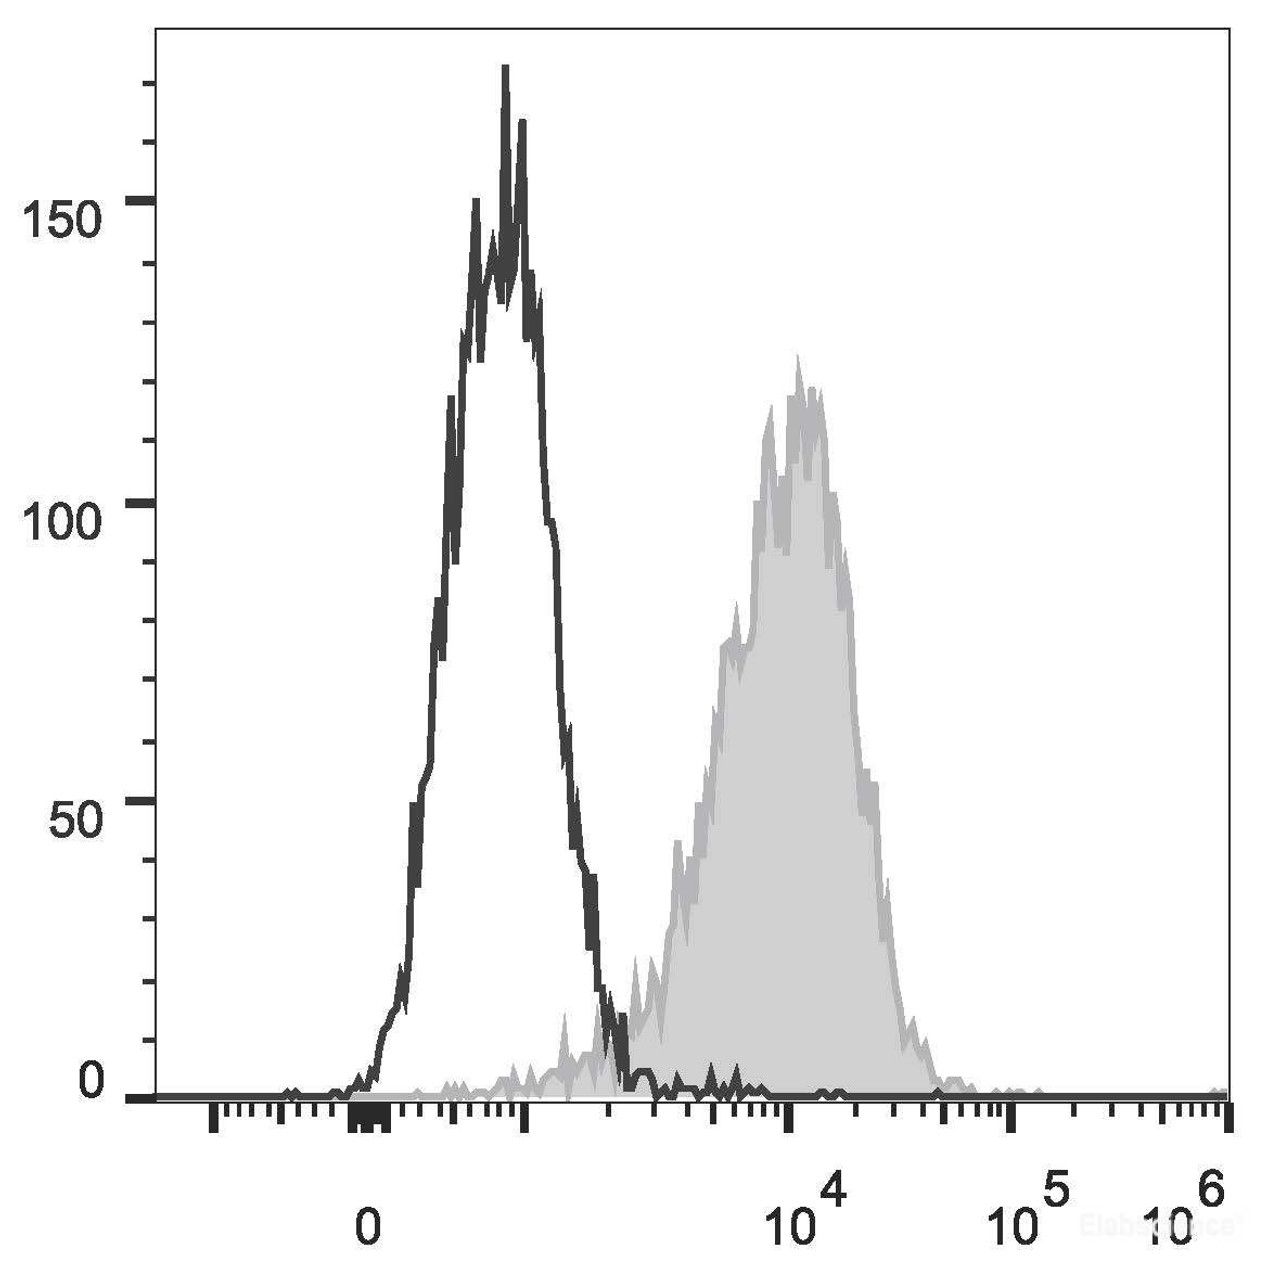 Daudi (human B Burkitt's lymphoma cell line) cells are stained with PE/Cyanine7 Anti-Human CD8 Antibody(filled gray histogram).Unstained Daudi cells(empty black histogram) are used as control.